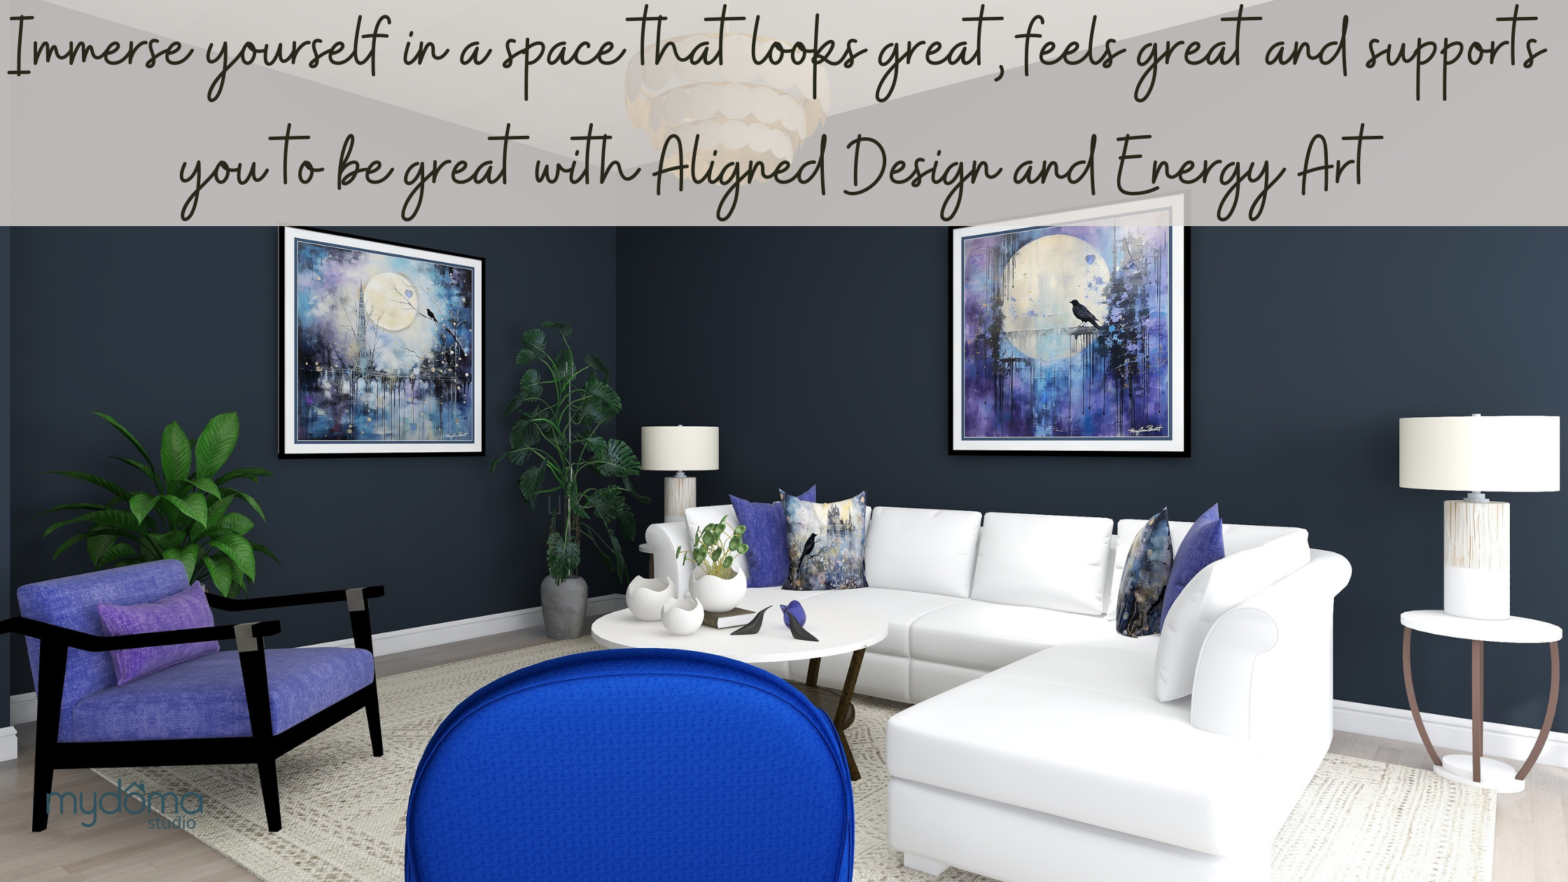 Immerse yourself in a space that looks great, feels great and supports you to be great with Aligned Design and Energy Art